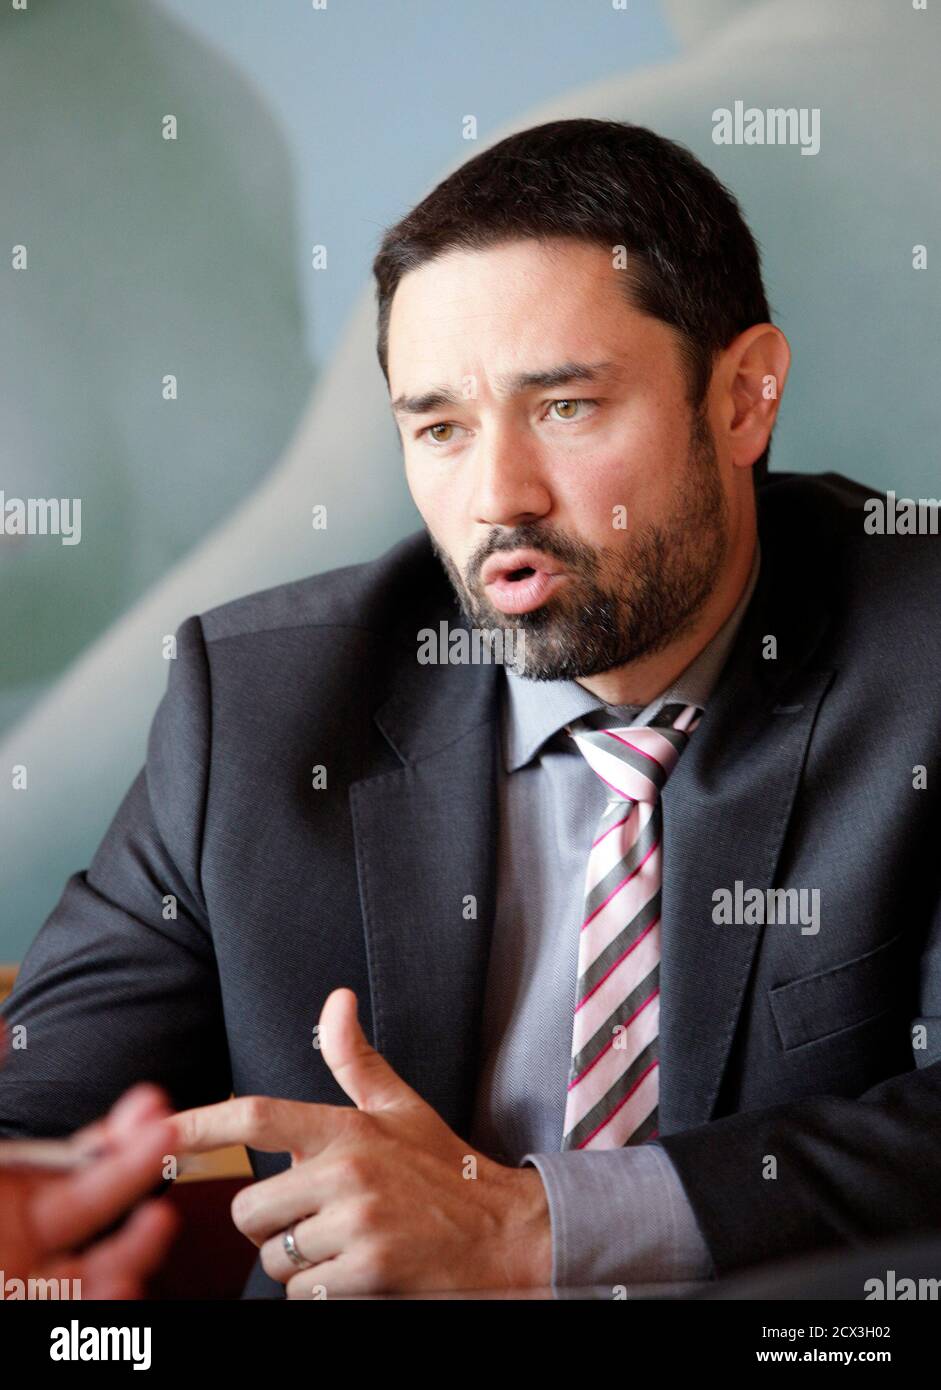 Janko Medja, CEO of NLB bank, speaks during an interview in Ljubljana September 29, 2014. Slovenia's top bank NLB (Nova Ljubljanska Banka) is likely to pass an EU-wide stress test after nearly collapsing under bad loans in 2013, but the government must press on with selling state assets to ensure stability, Medja said. REUTERS/Srdjan Zivulovic (SLOVENIA - Tags: BUSINESS) Stock Photo